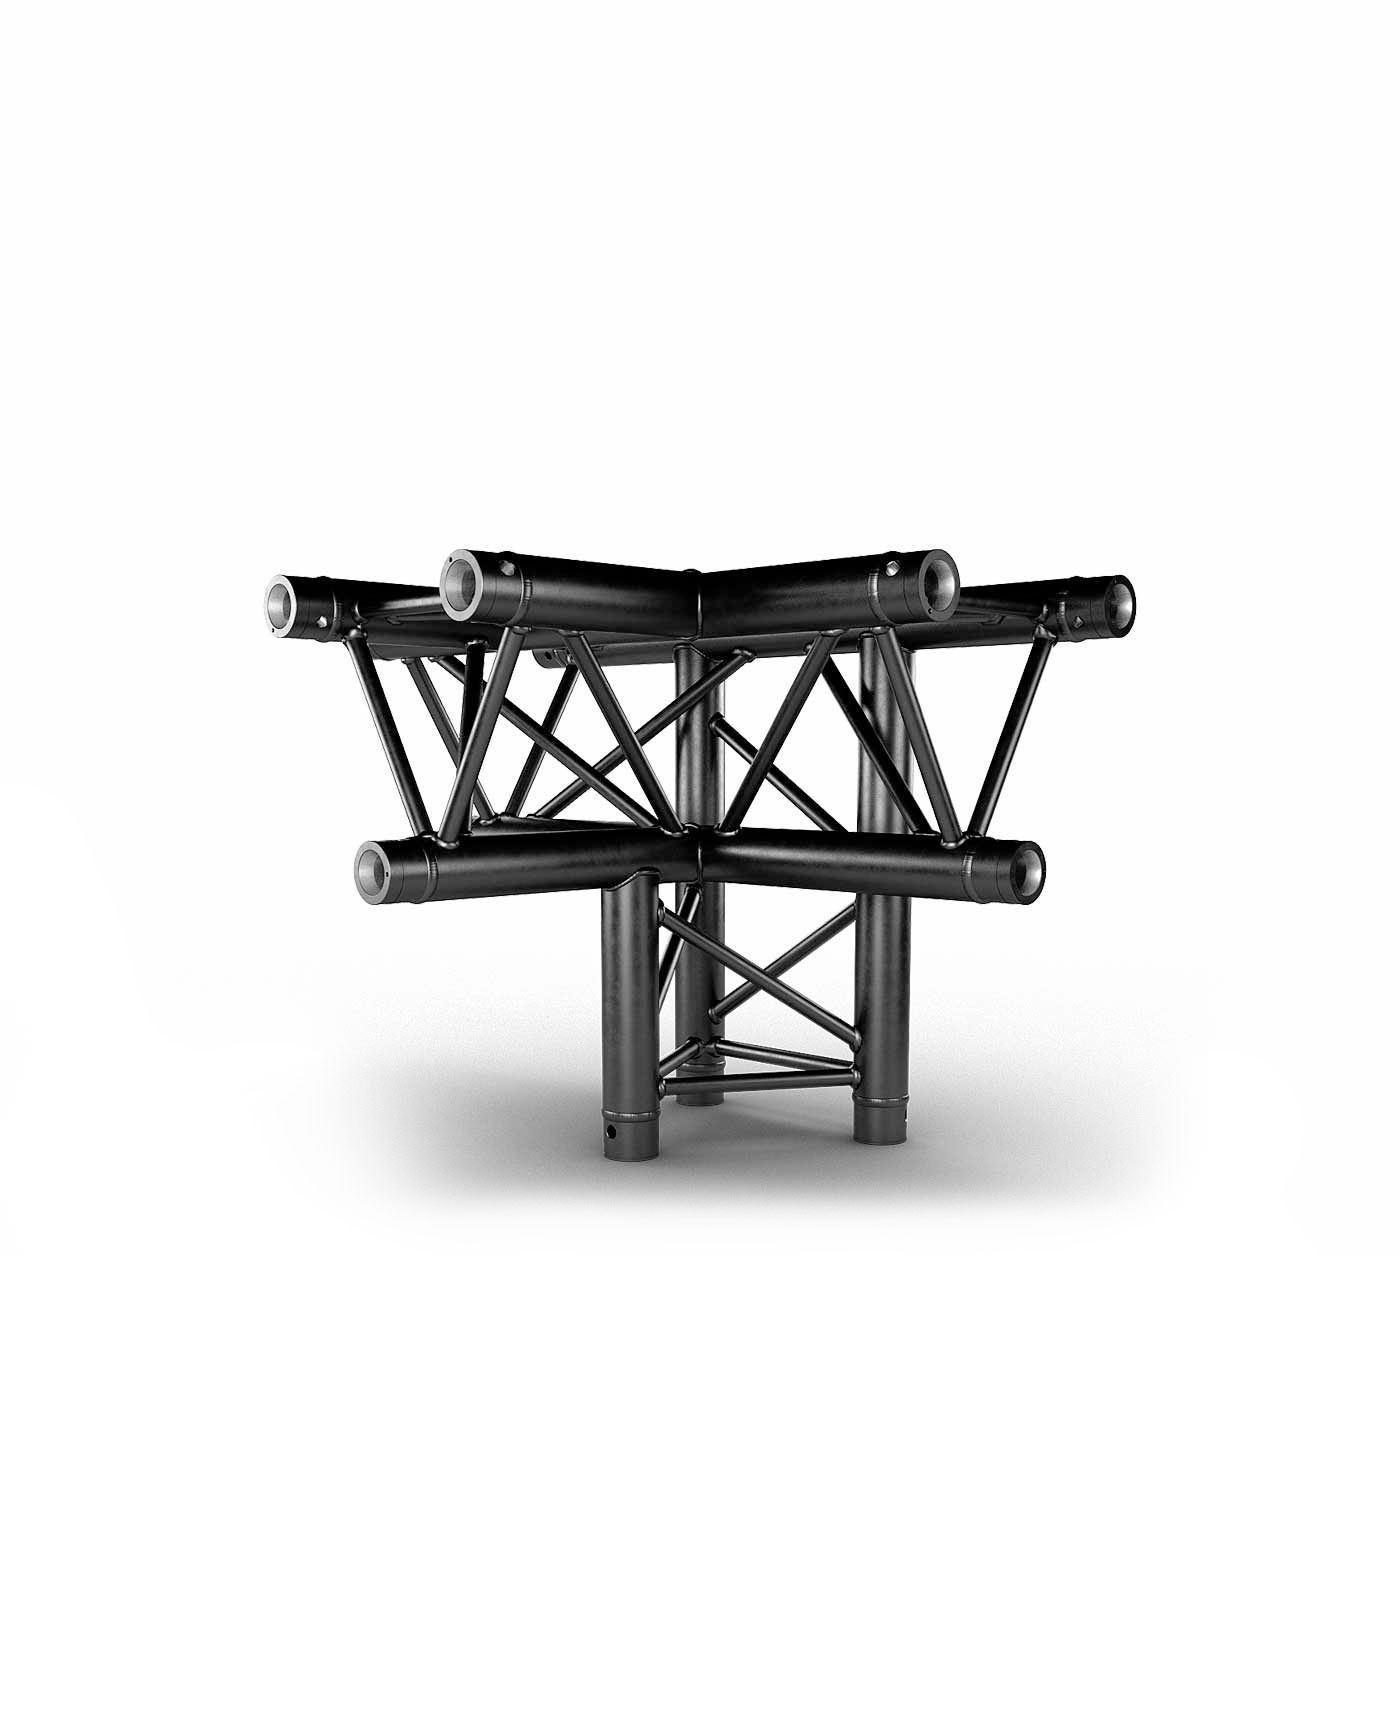 TRUSS TRIO 290 T-piece - Black - 4 directions - top down - Connection kits included